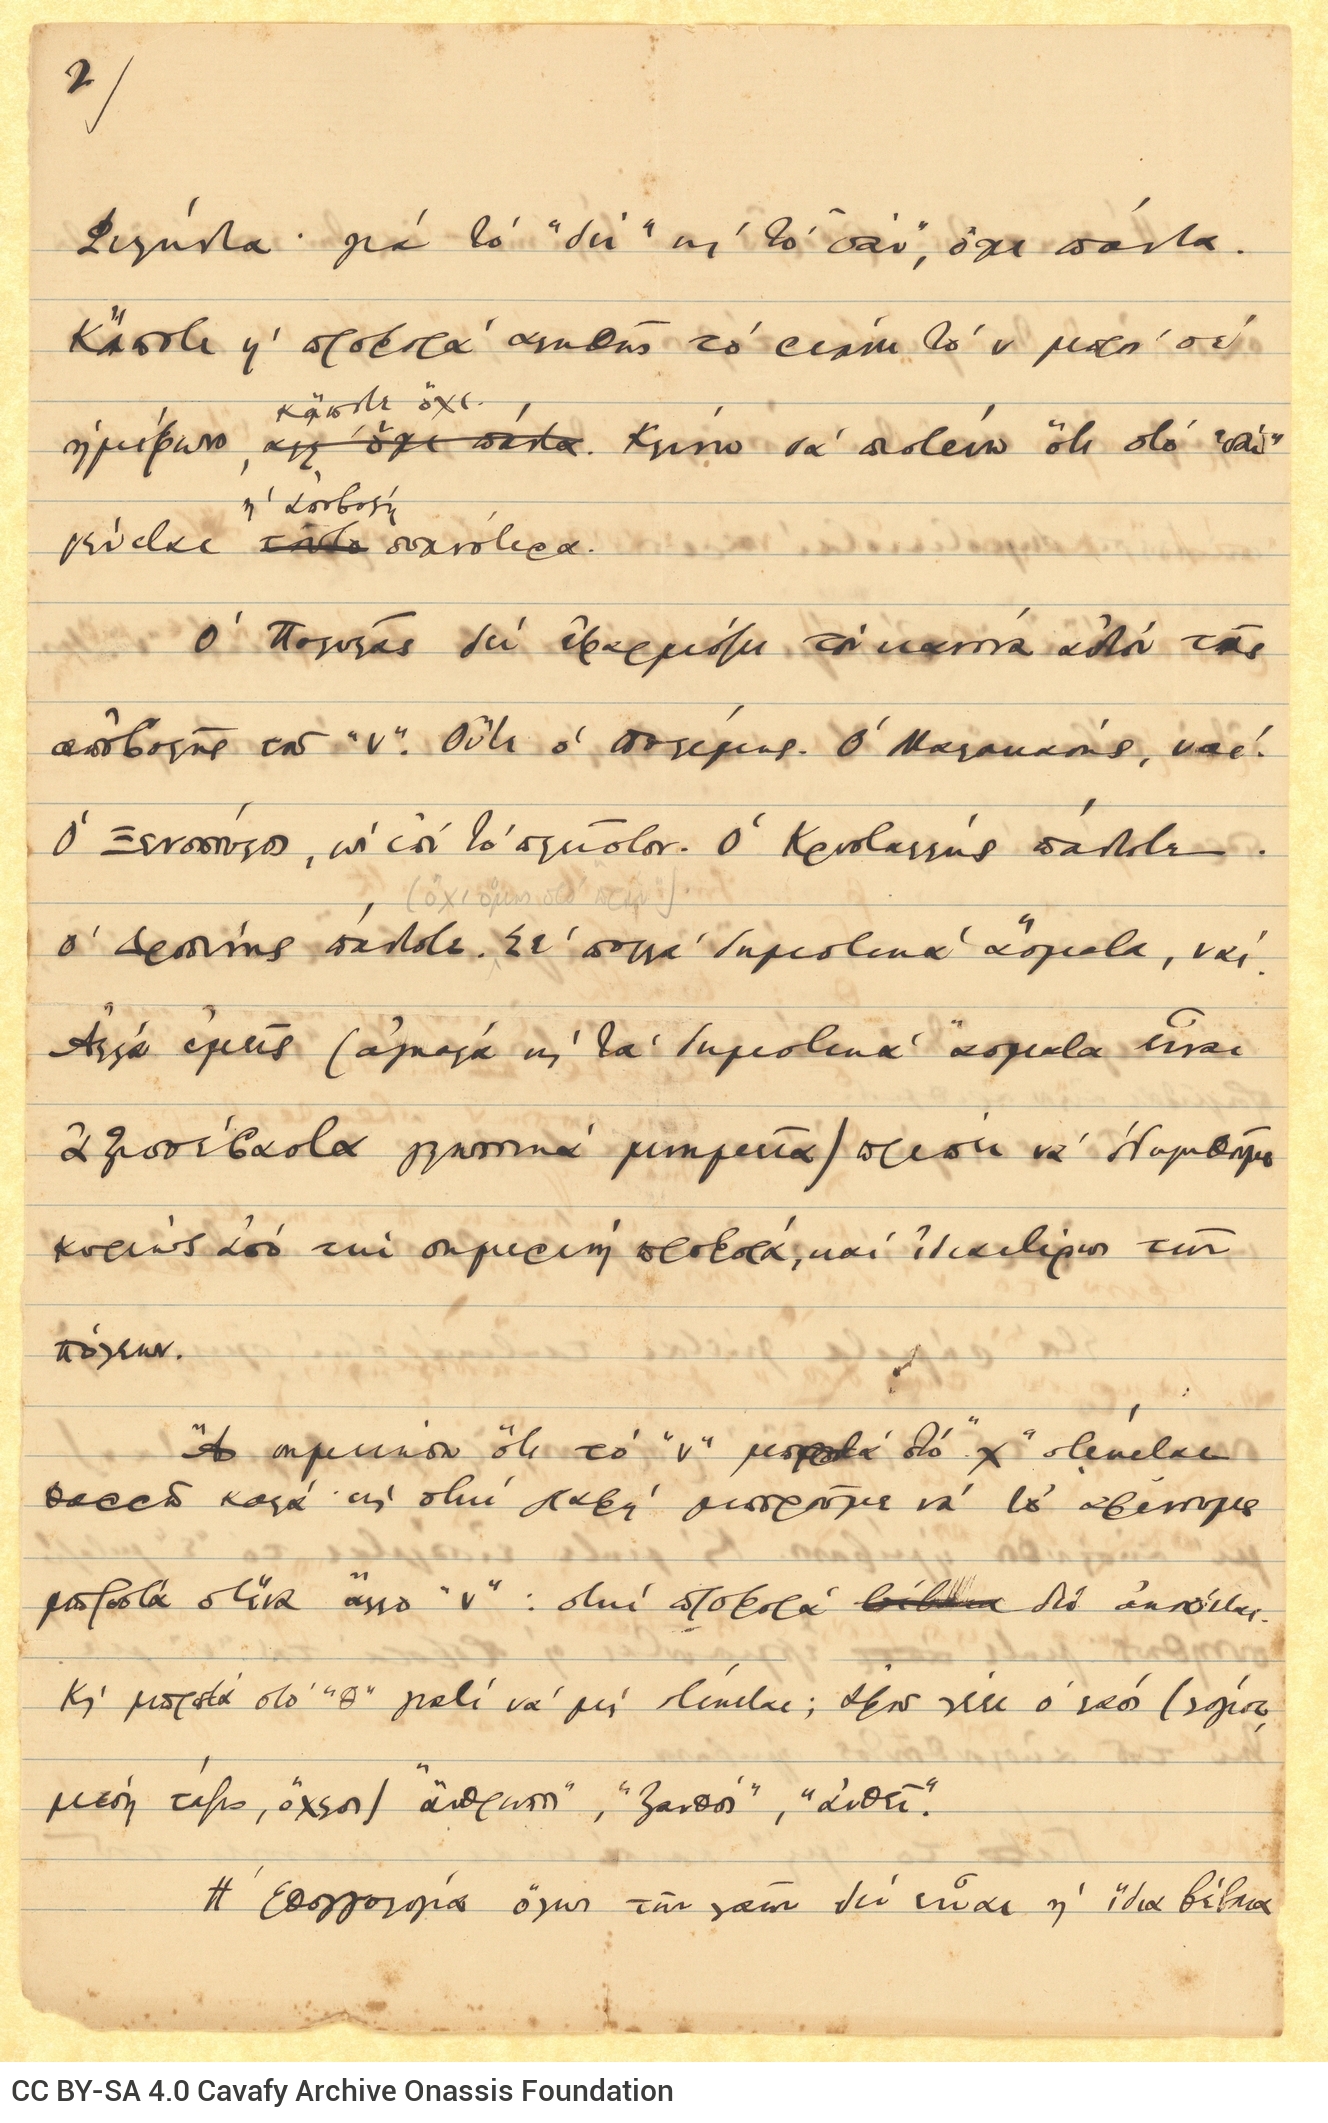 Handwritten text on all sides of two ruled double sheet notepapers. Pages 2 to 4 are numbered. Remarks on the pronunciatio